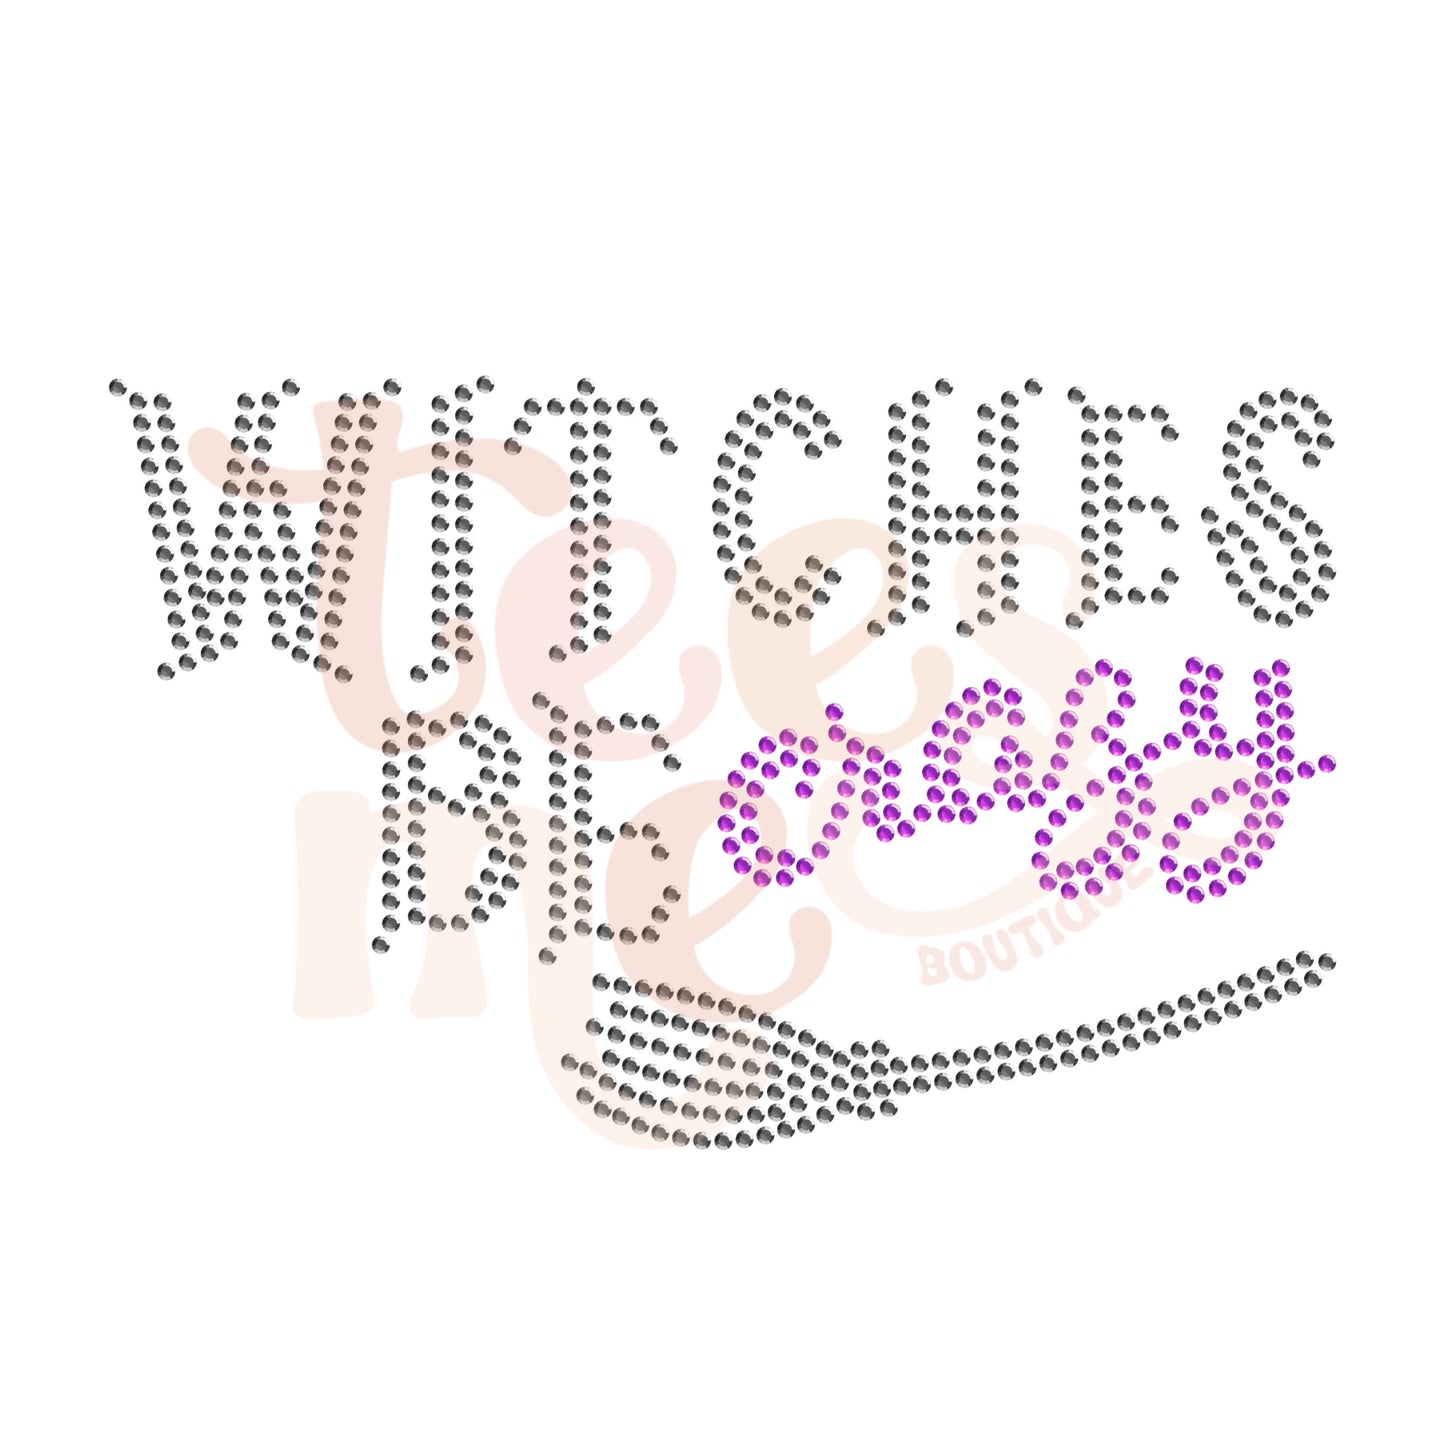 Witches Be Crazy RHINESTONE TRANSFER